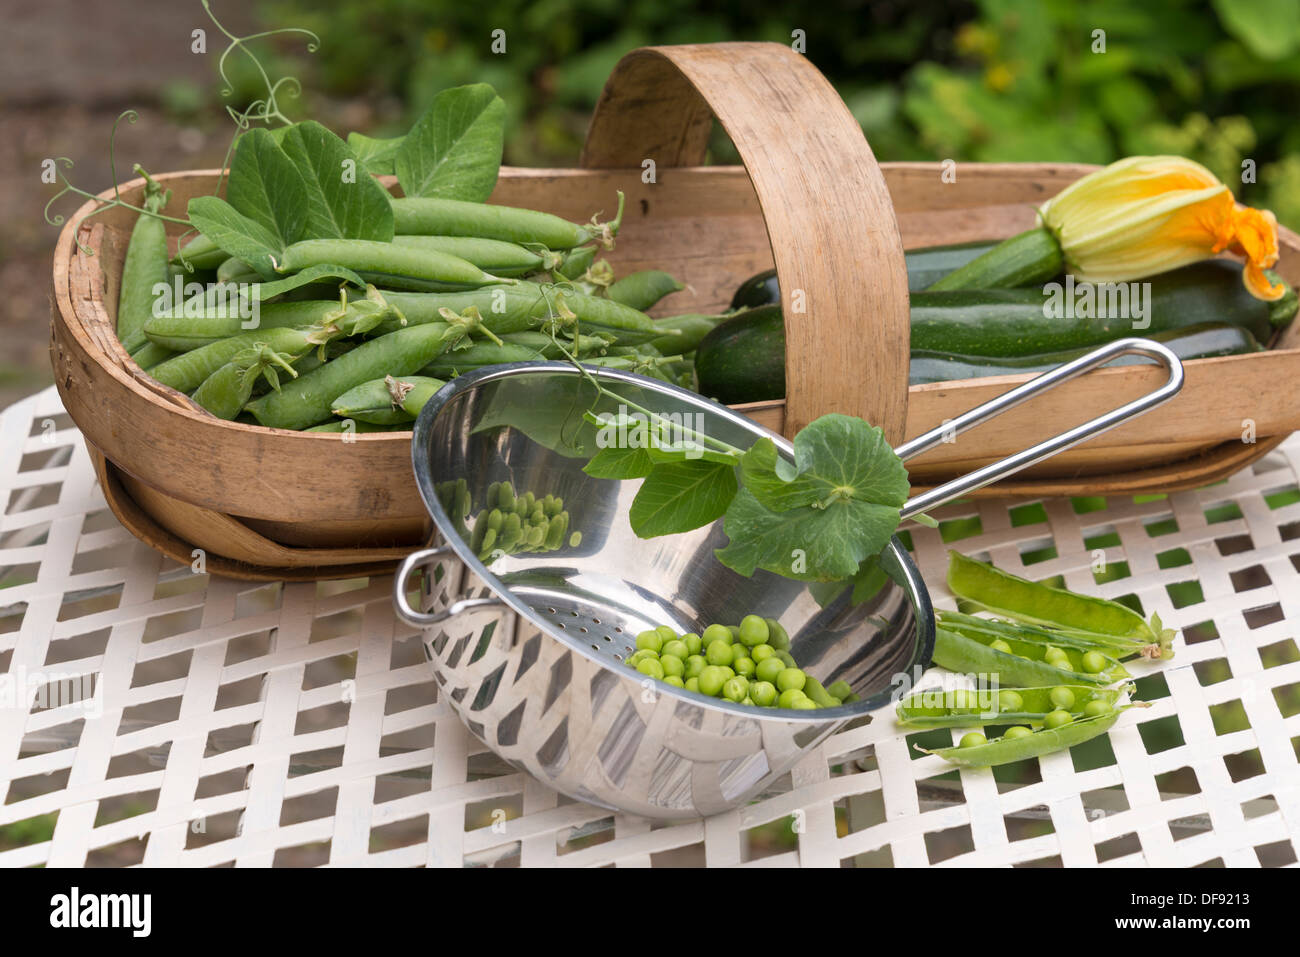 Summer vegetables - freshly picked peas in pods with courgettes in a Sussex trug. UK. Stock Photo